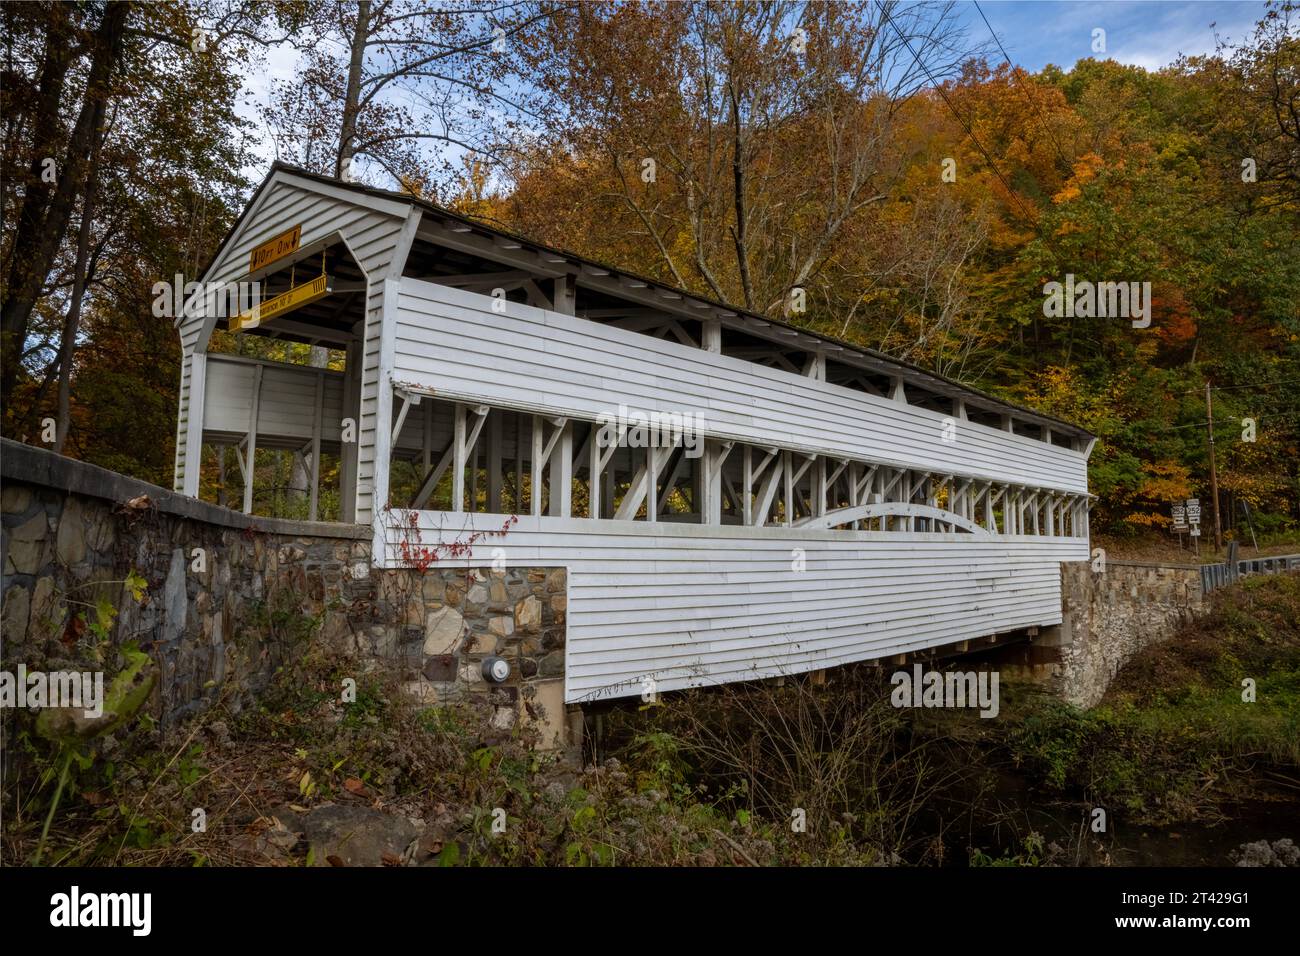 Valley Forge, PA USA 27th, Oct. 2023 - Knox covered bridge in Valley Forge National Park in the mid-Atlantic region of the United States with fall colors peaking. Credit: Don Mennig / Alamy News Stock Photo